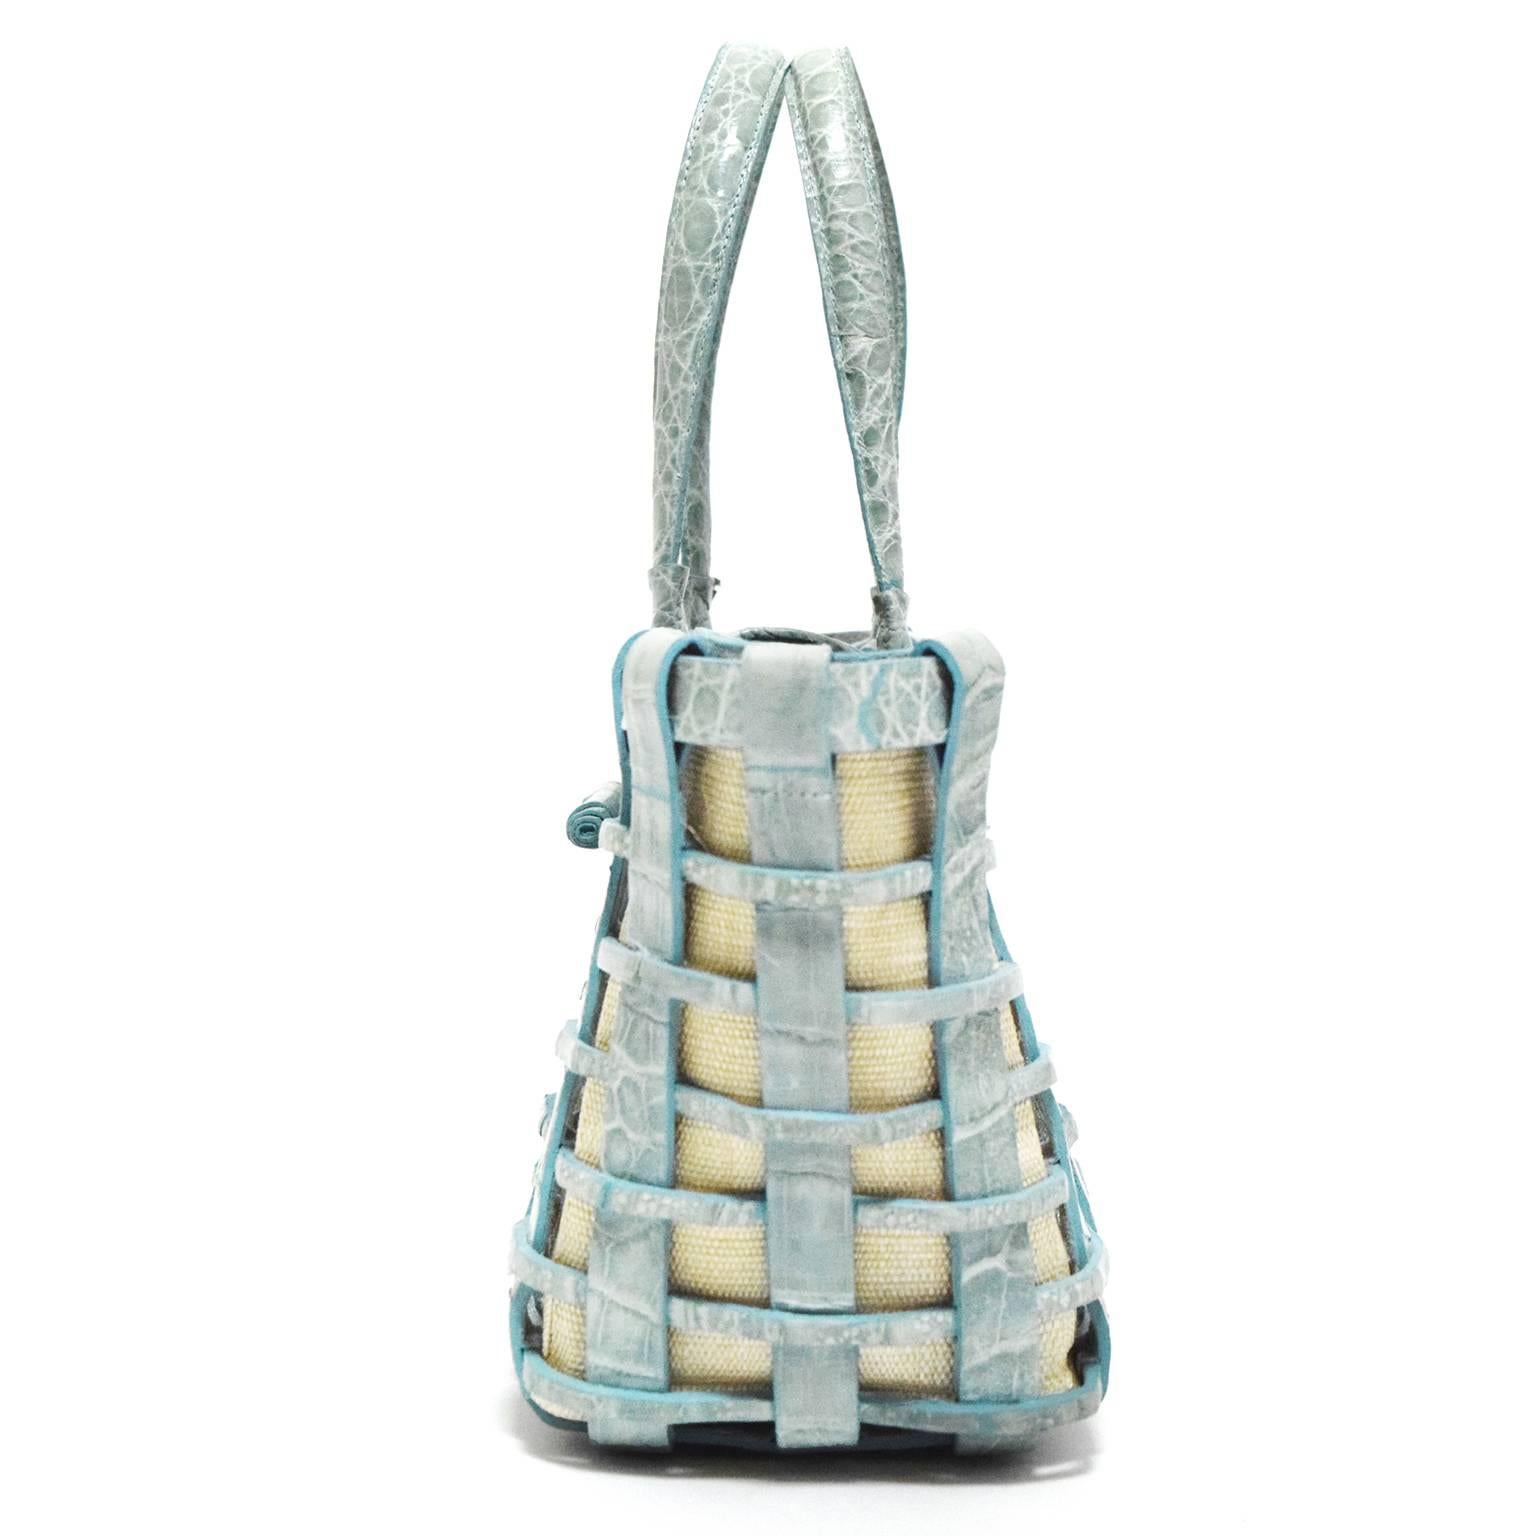 This Nancy Gonzalez Mini Tote is made from croc leather and is woven into a beautiful structured tote. Lined with beige canvas for a subtle contrast with the seafoam coloration. Looped Closure, and inside suede.  Strap drop 7.5 inches.